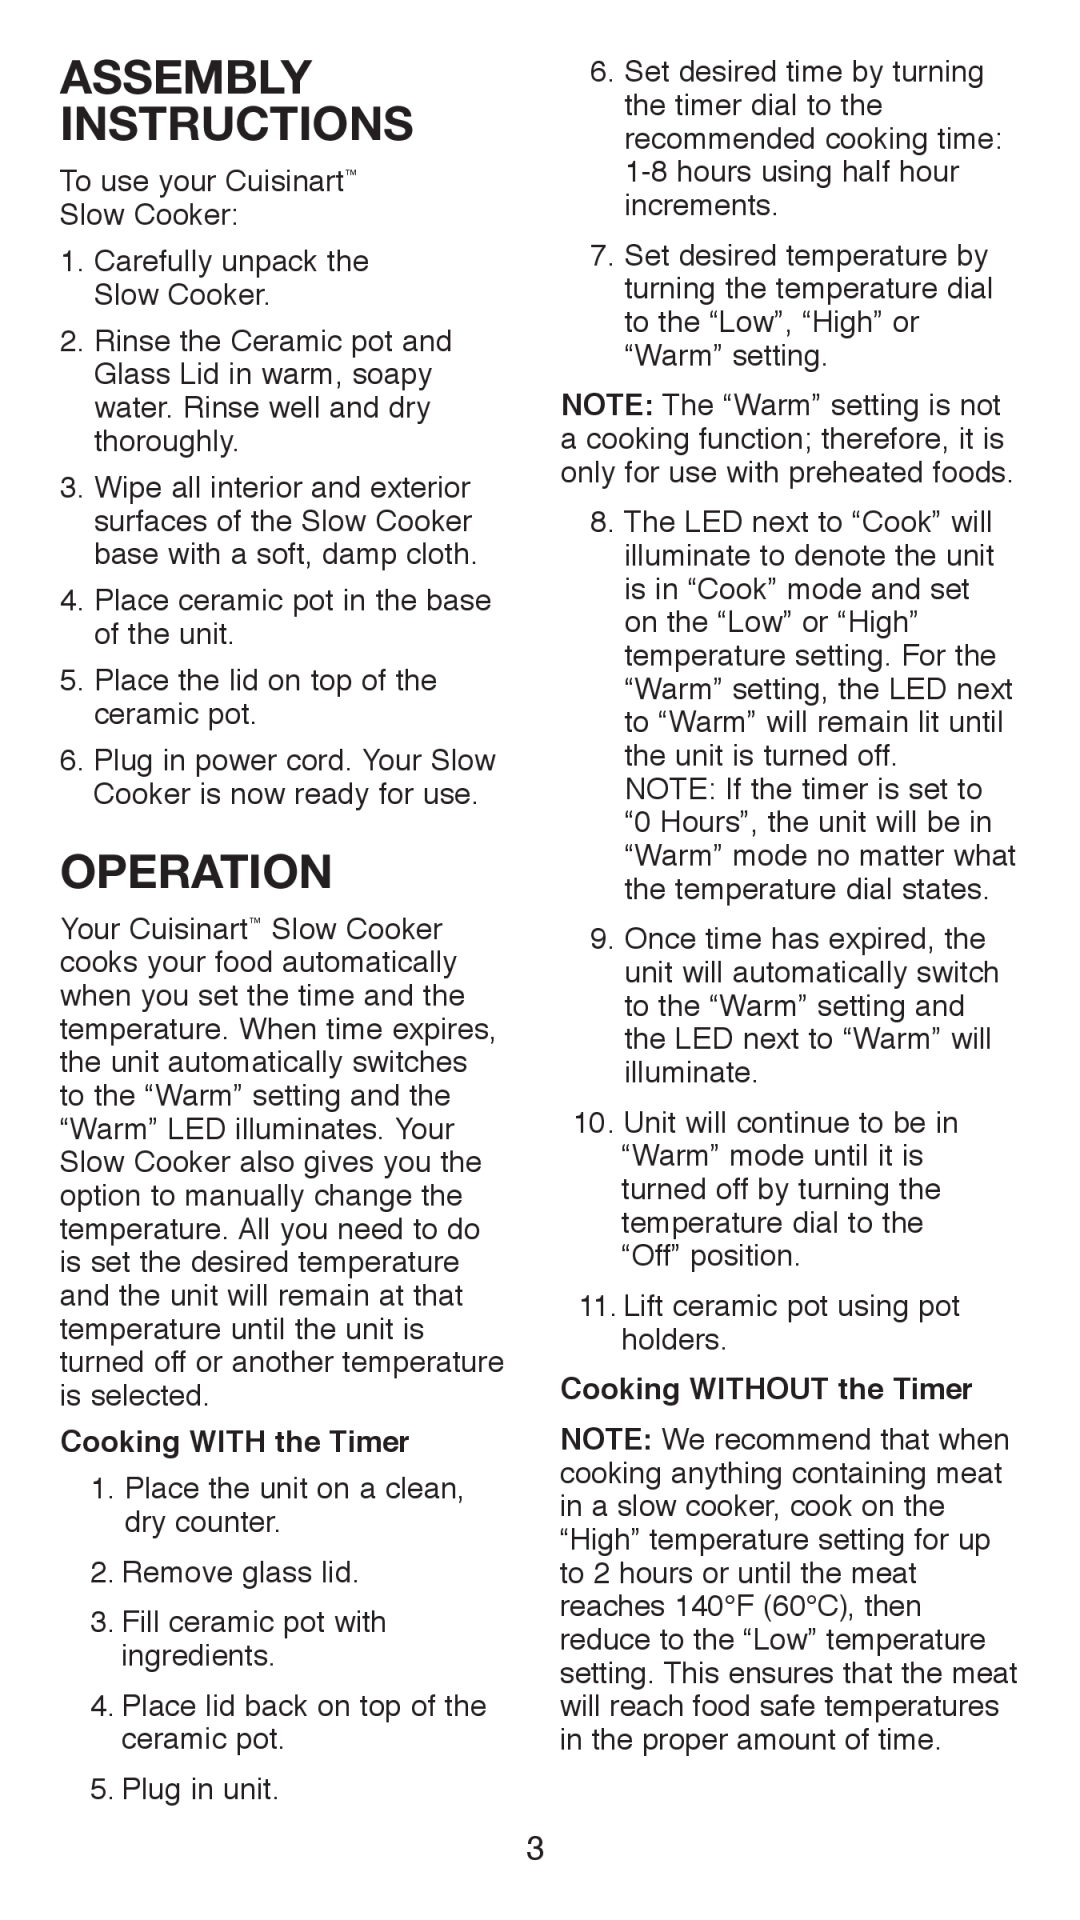 Cuisinart CSC-650C manual Assembly Instructions, Operation, Cooking WITH the Timer, Cooking WITHOUT the Timer 